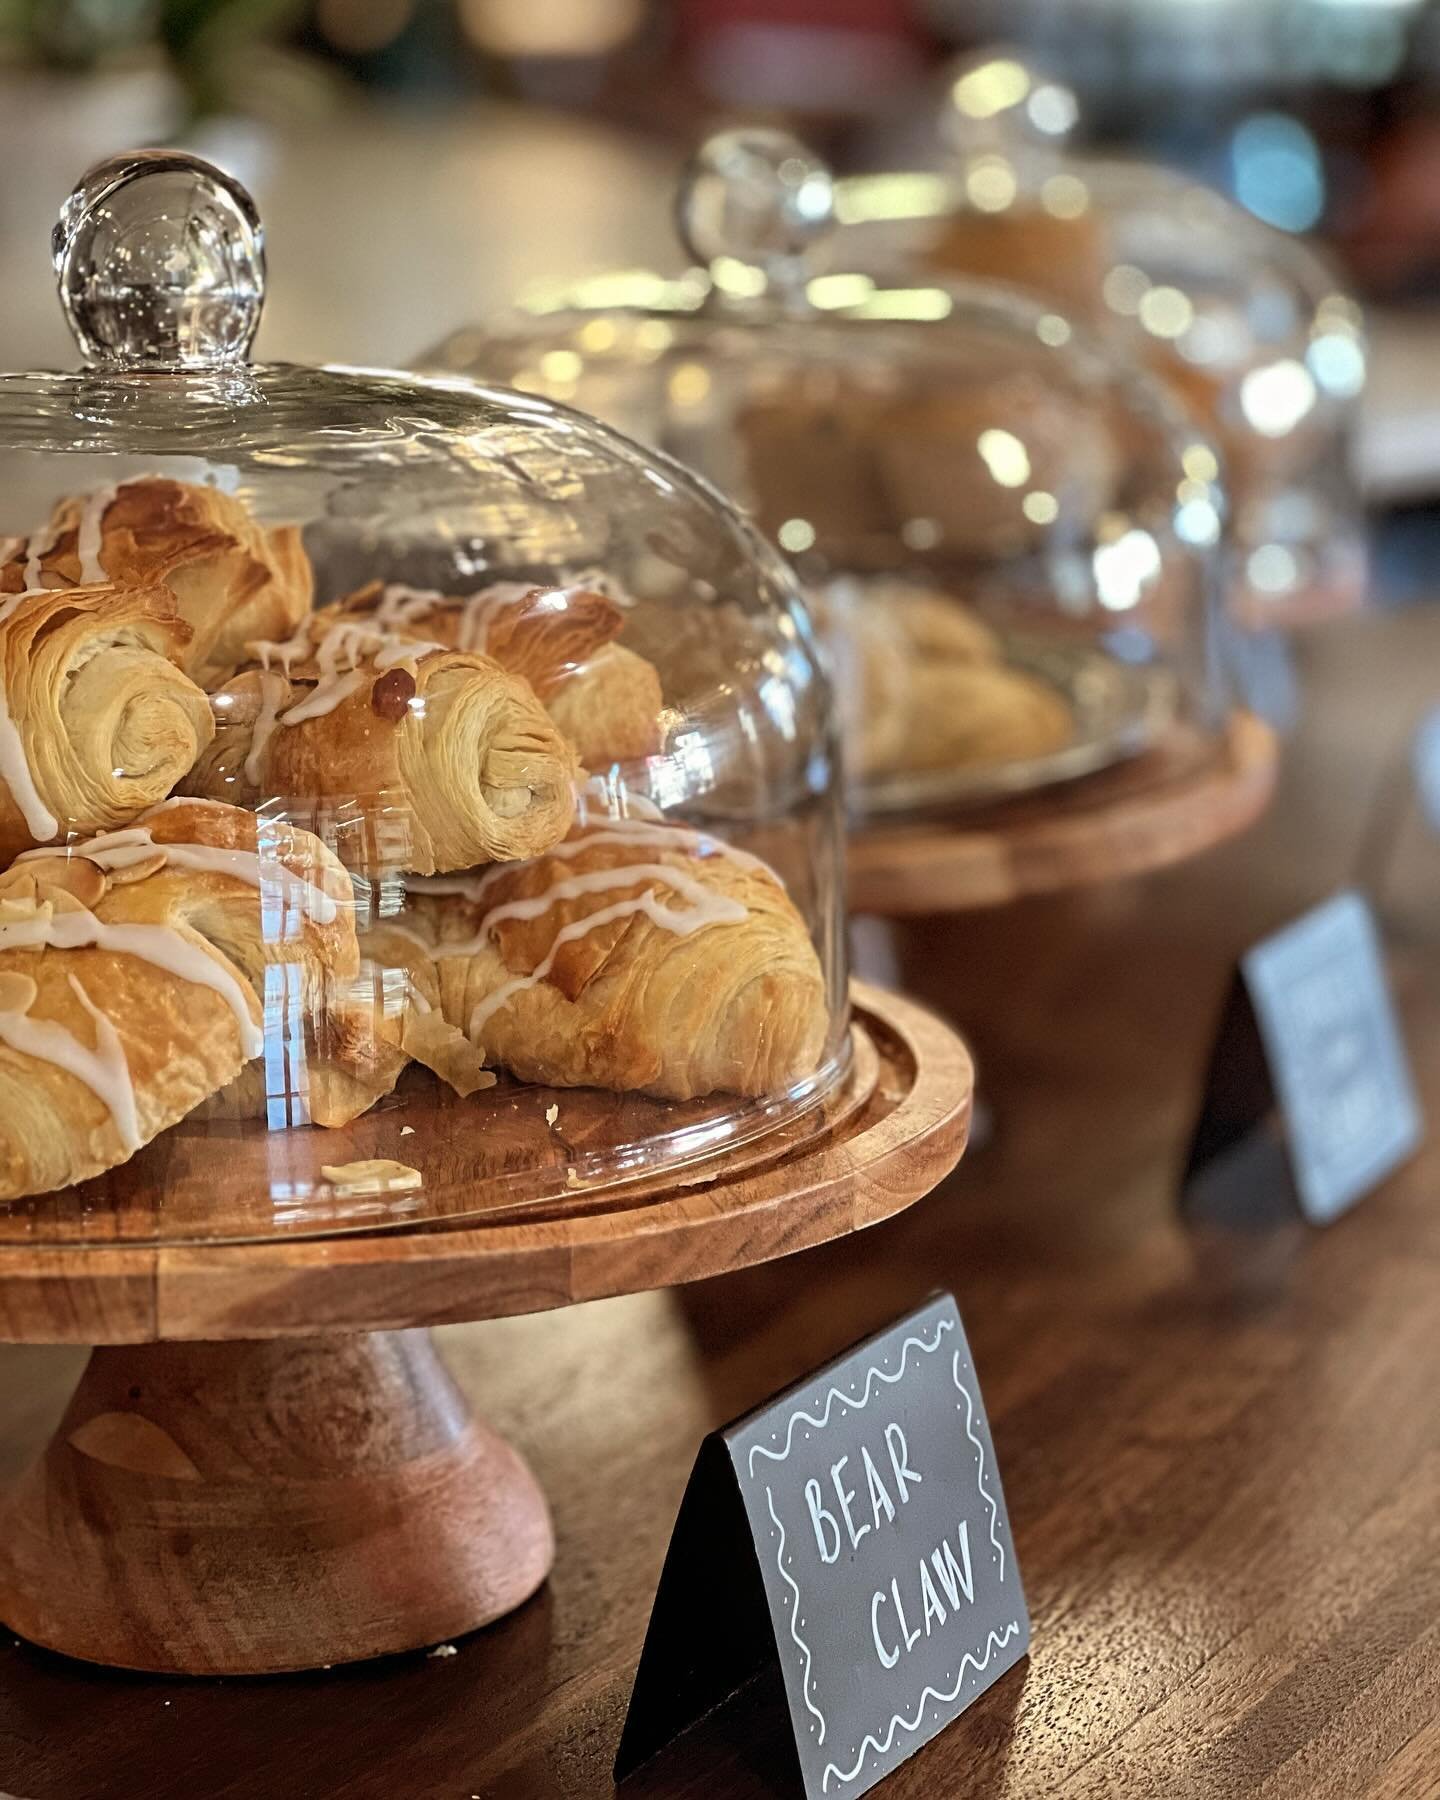 Craving a morning treat? Swing by for coffee and freshly made pastries! Open 7 am- 7 pm Tuesday through Friday and 8 am - 4 pm Saturday and Sunday. ☕️ 🥐